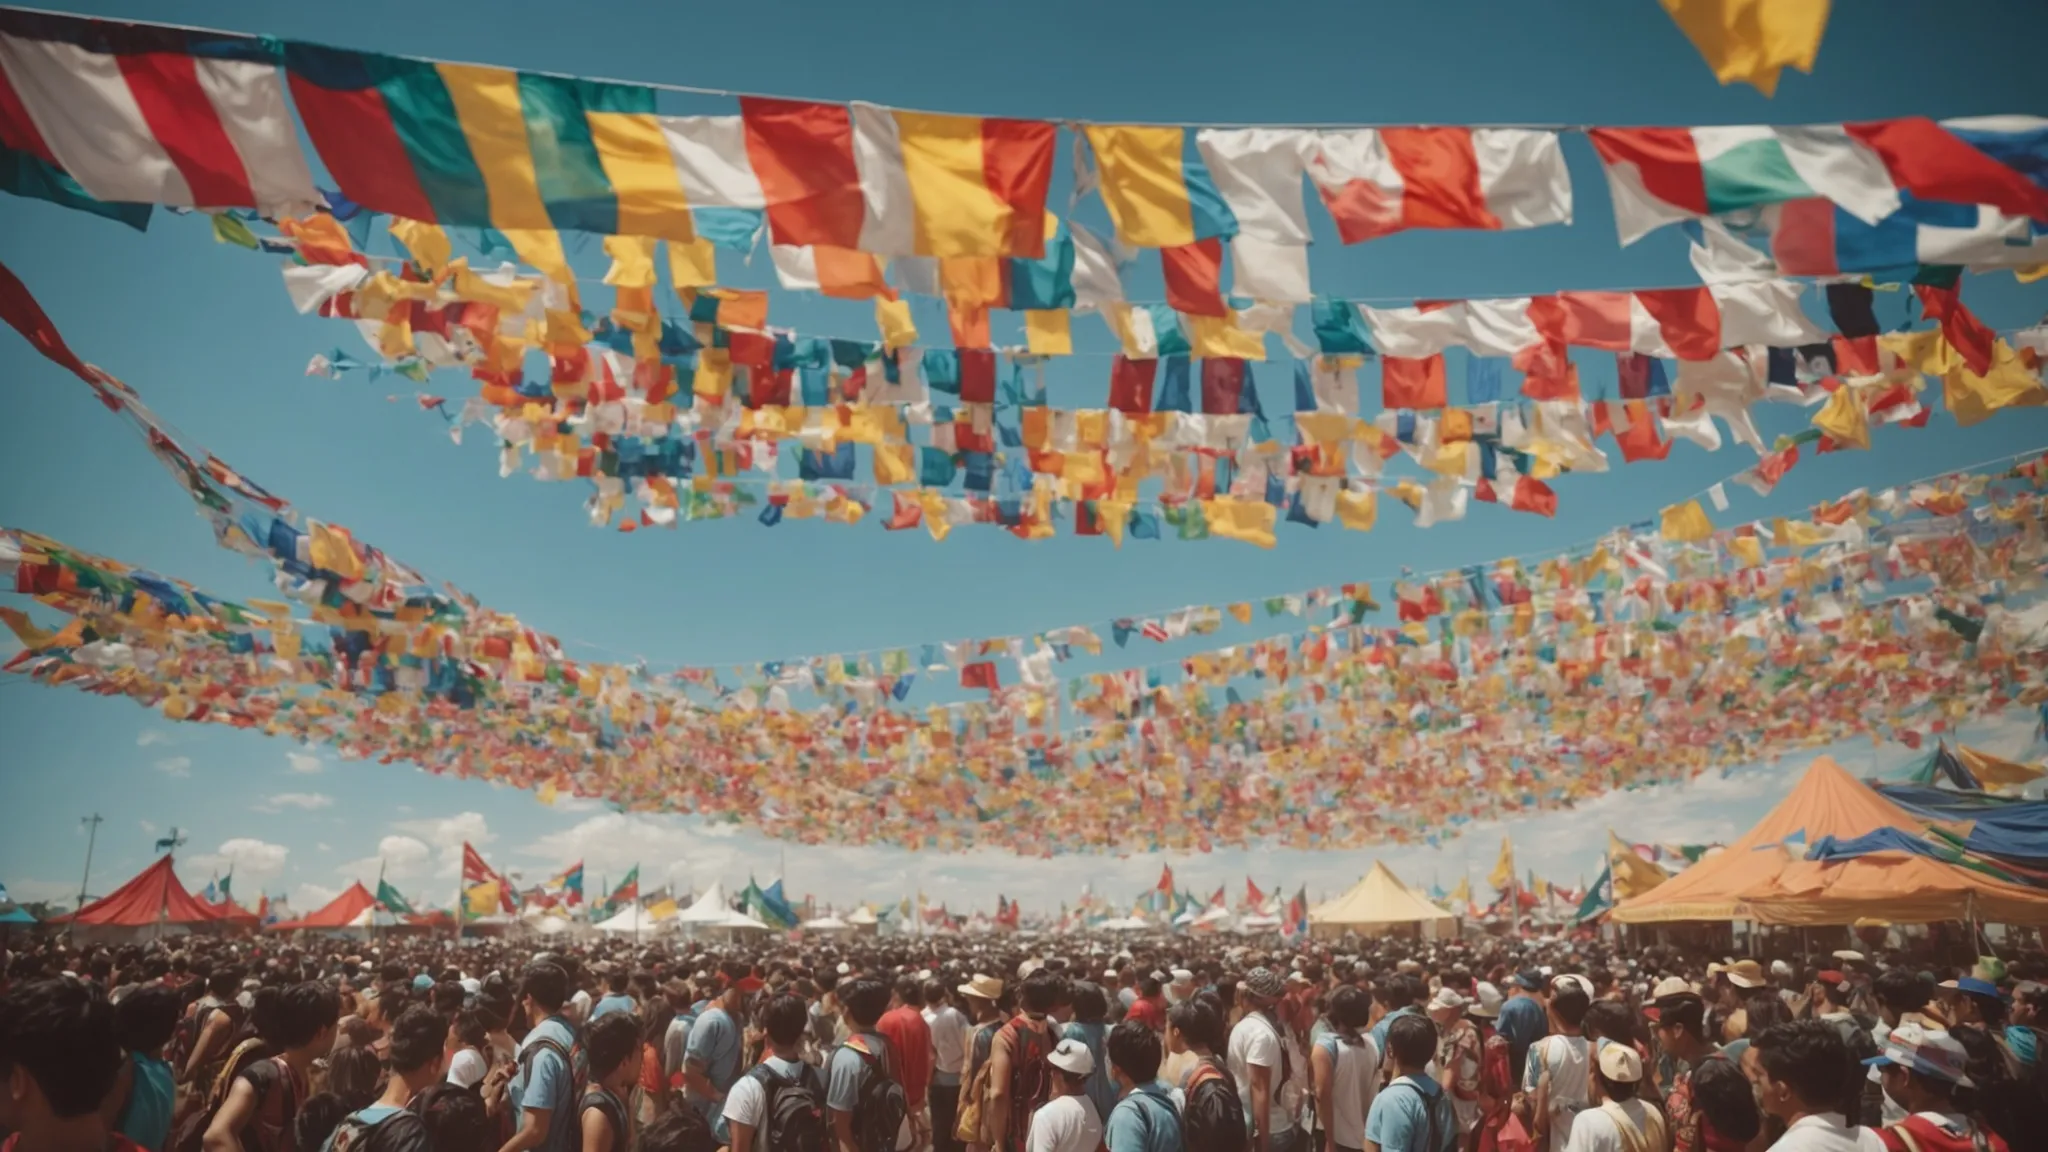 colorful flags flutter above a sea of festival-goers, clad in an eclectic mix of futuristic and vintage styles, basking under a clear blue sky.